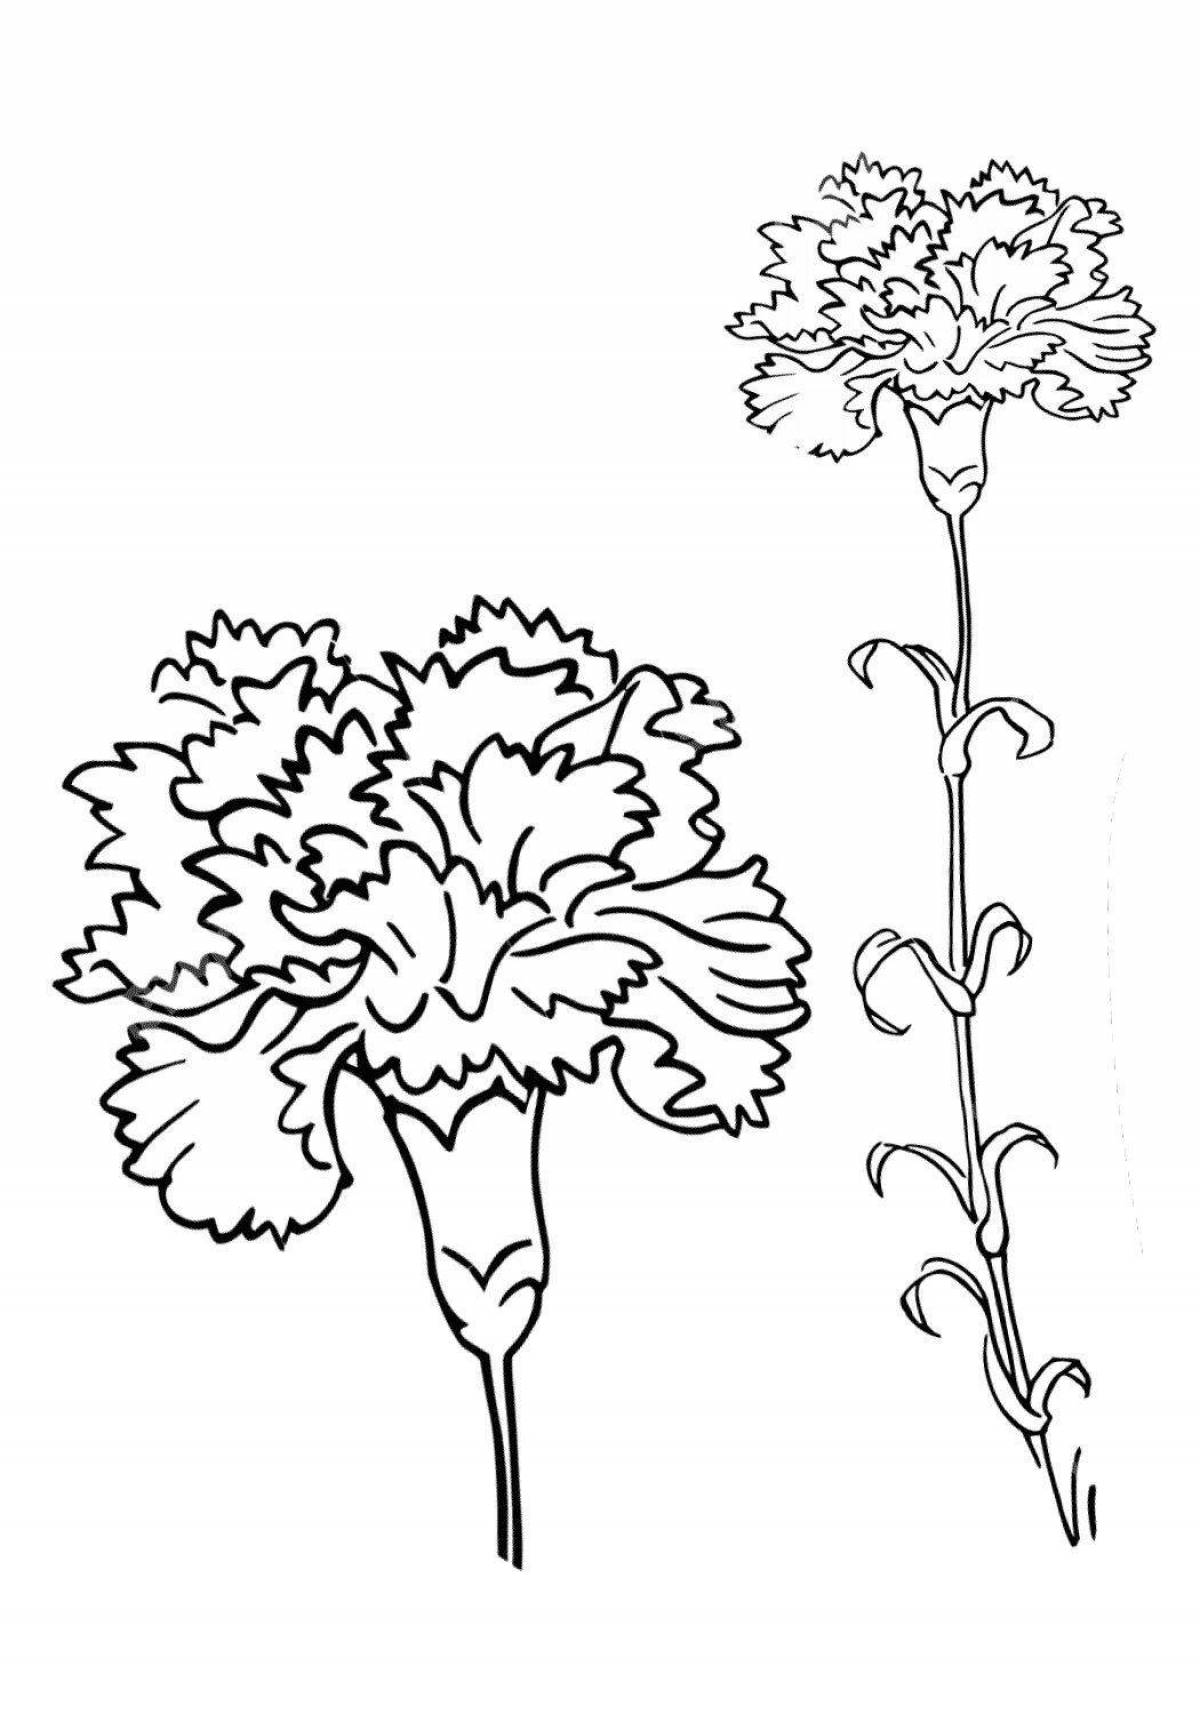 Two carnations #1